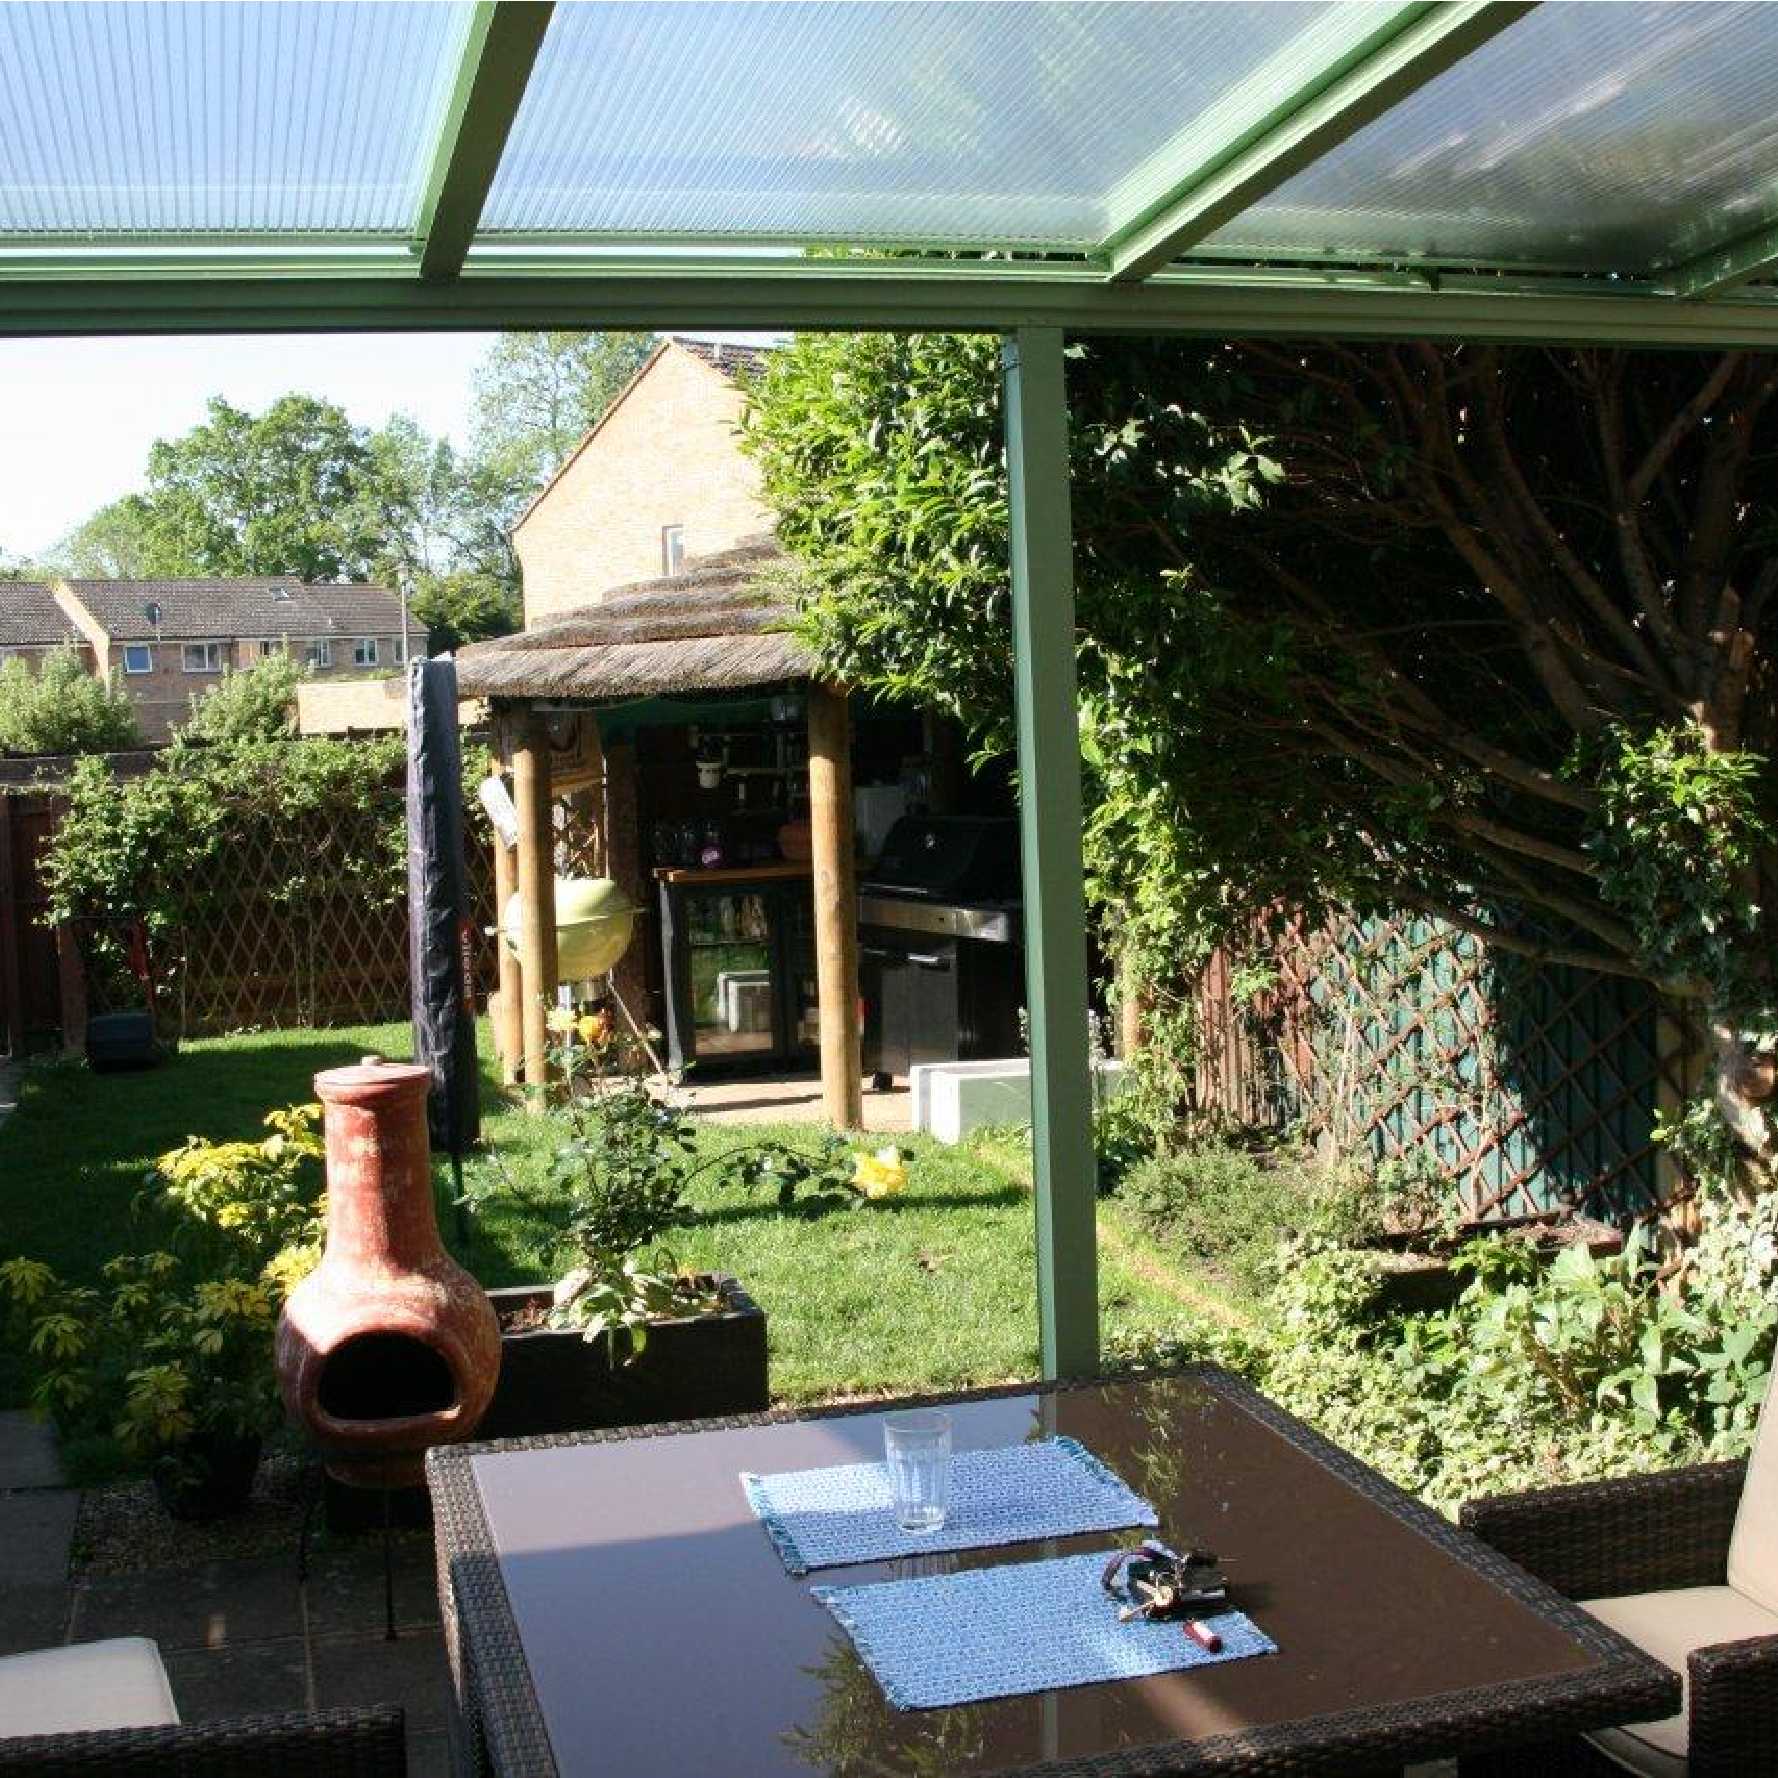 Affordable Omega Smart Lean-To Canopy, White with 16mm Polycarbonate Glazing - 7.0m (W) x 3.5m (P), (4) Supporting Posts